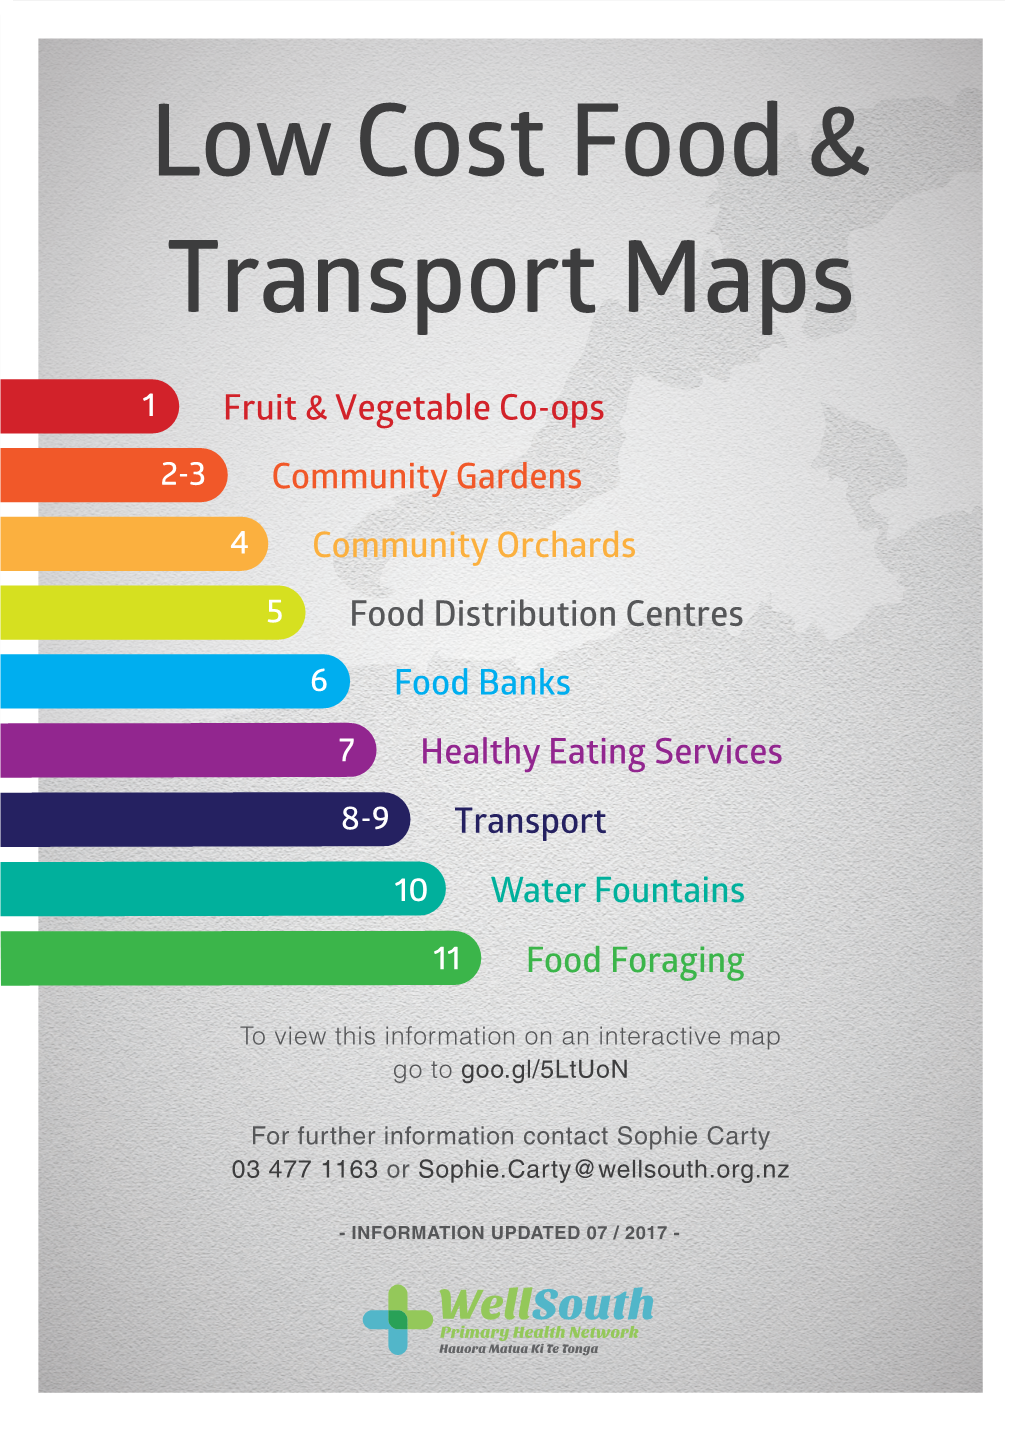 Low Cost Food & Transport Maps